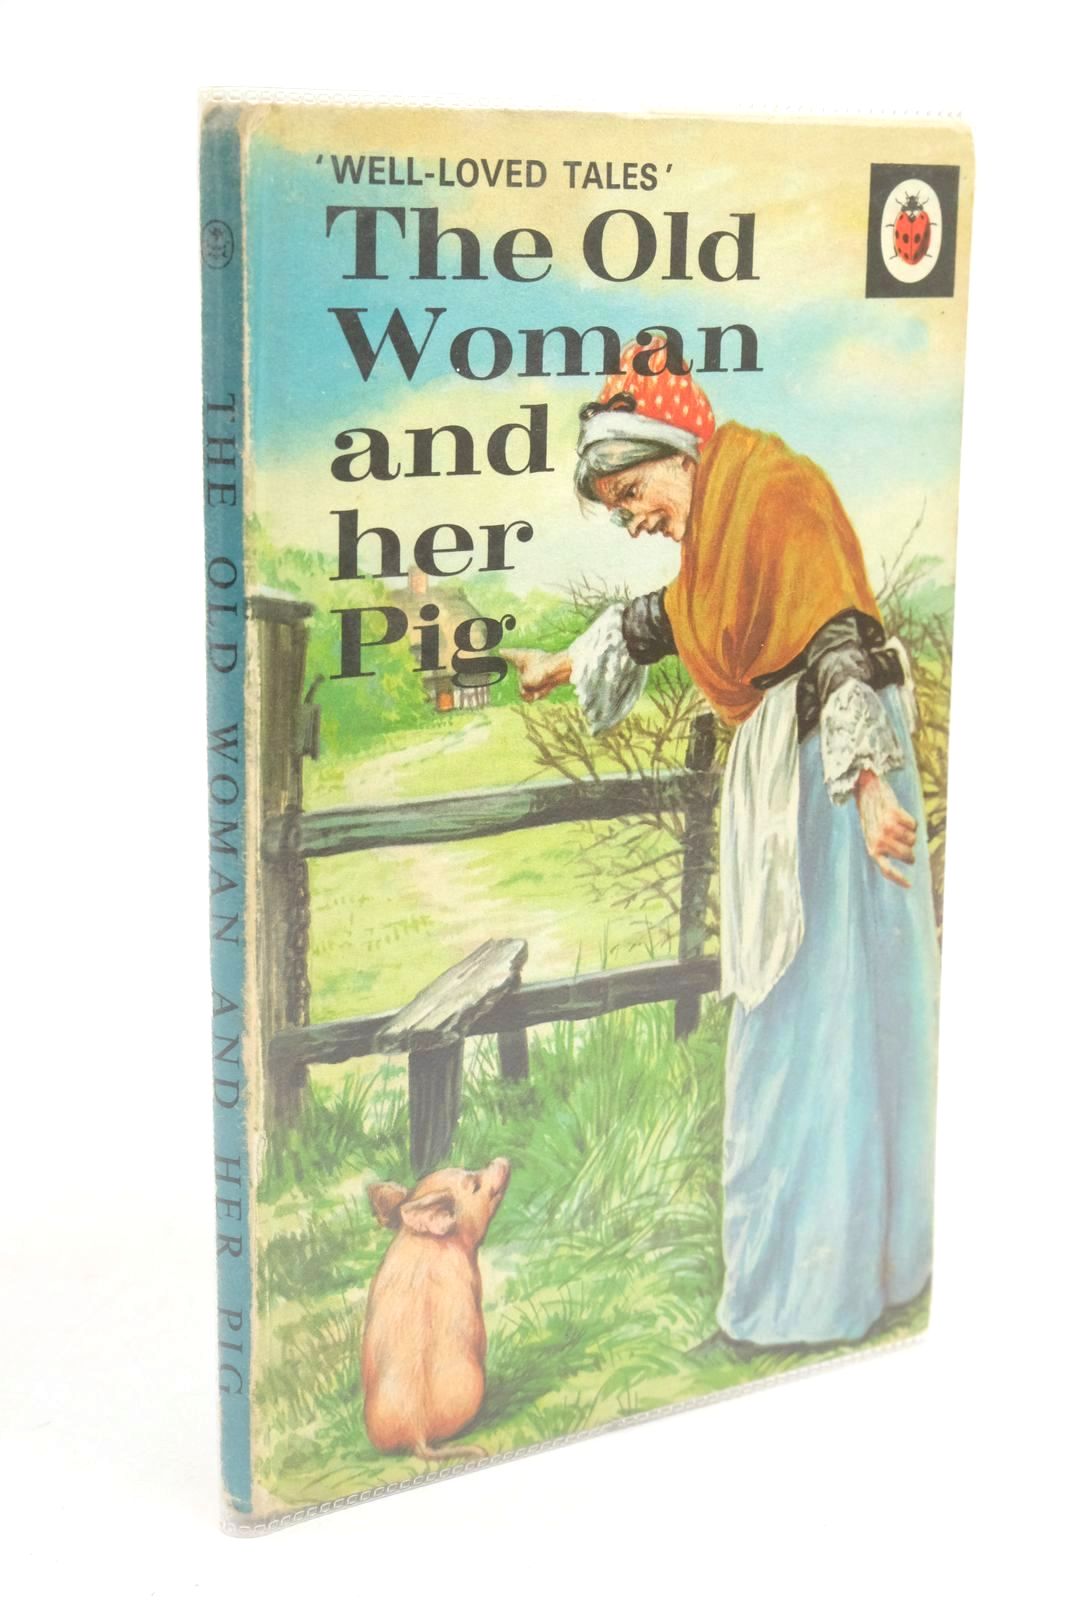 Photo of THE OLD WOMAN AND HER PIG written by Southgate, Vera illustrated by Lumley, Robert published by Ladybird Books (STOCK CODE: 1322379)  for sale by Stella & Rose's Books